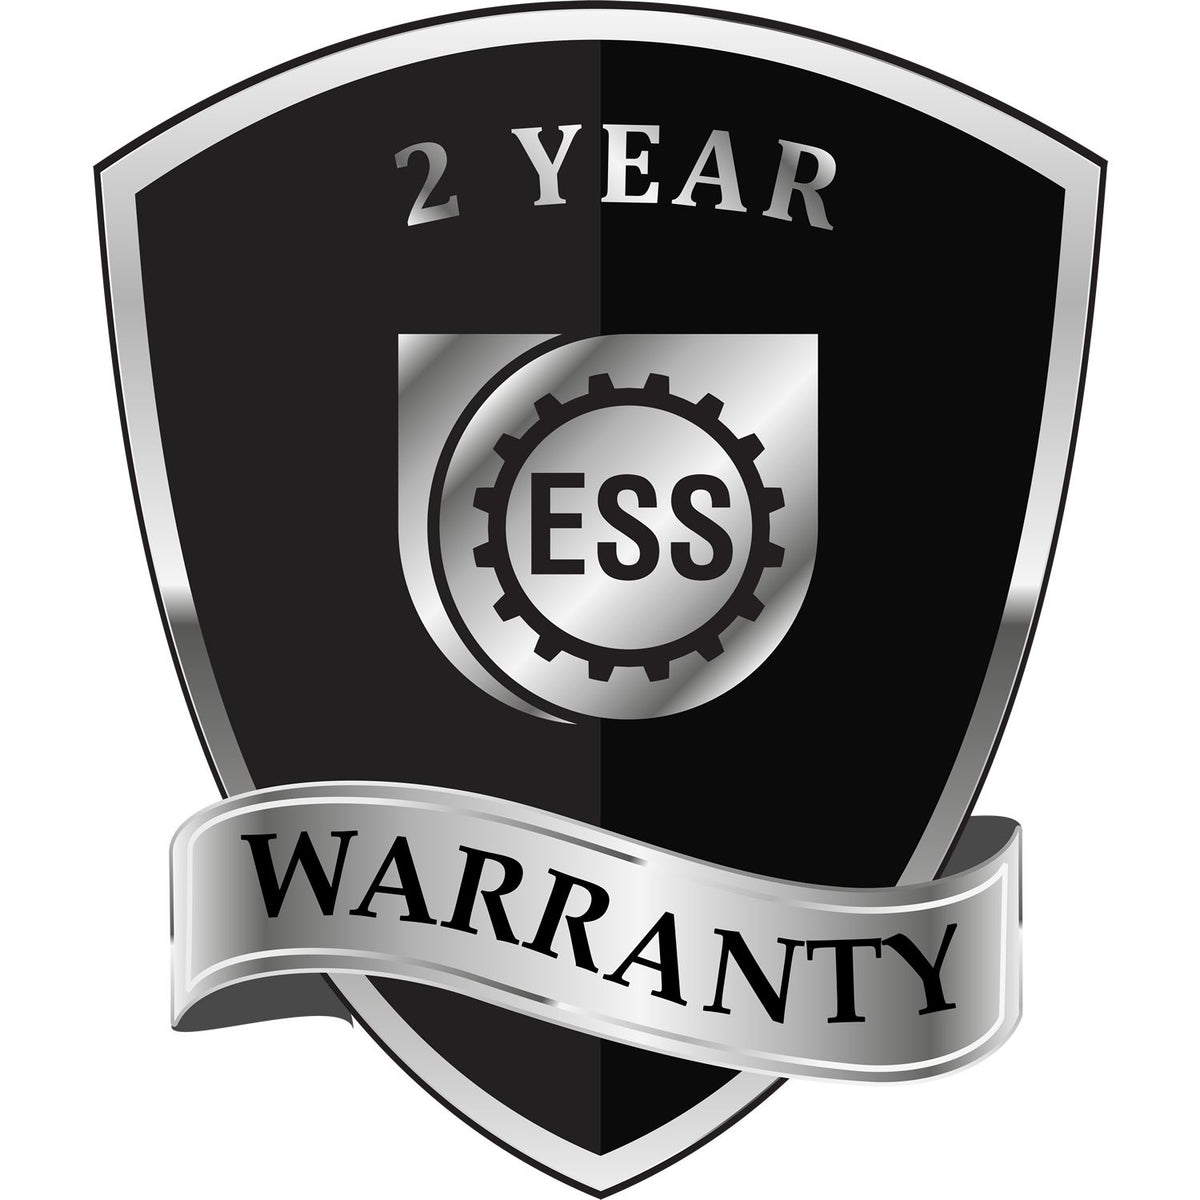 A black and silver badge or emblem showing warranty information for the Long Reach Alaska Geology Seal